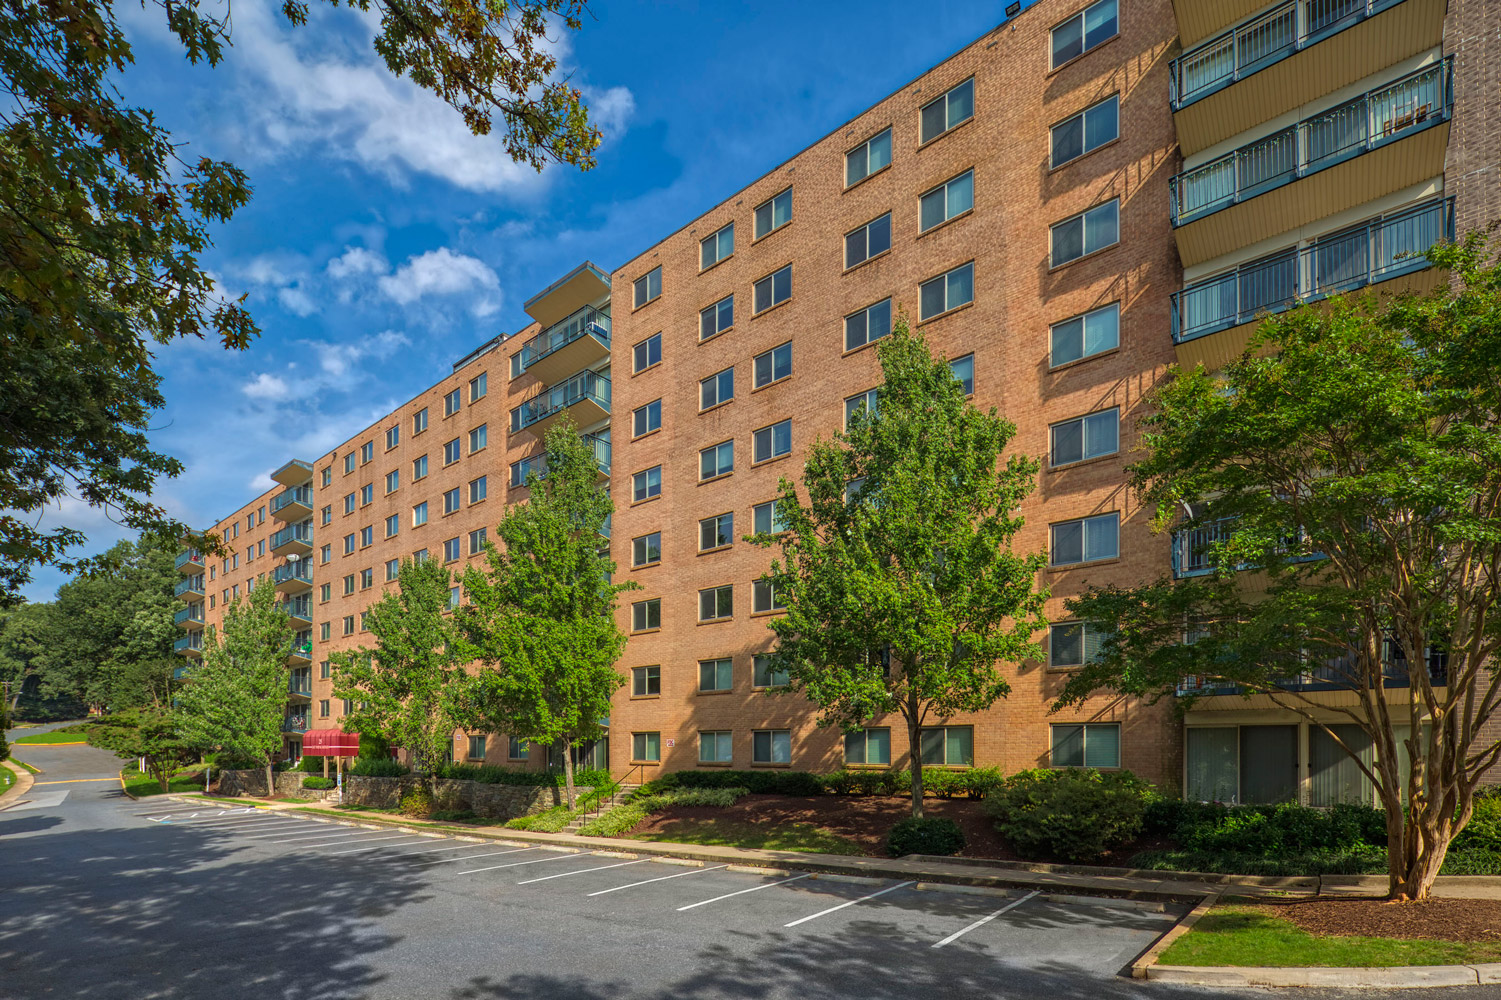 Studio, 1 and 2-bedroom apartments at Wayne Manchester Towers Apartments in Silver Spring, MD